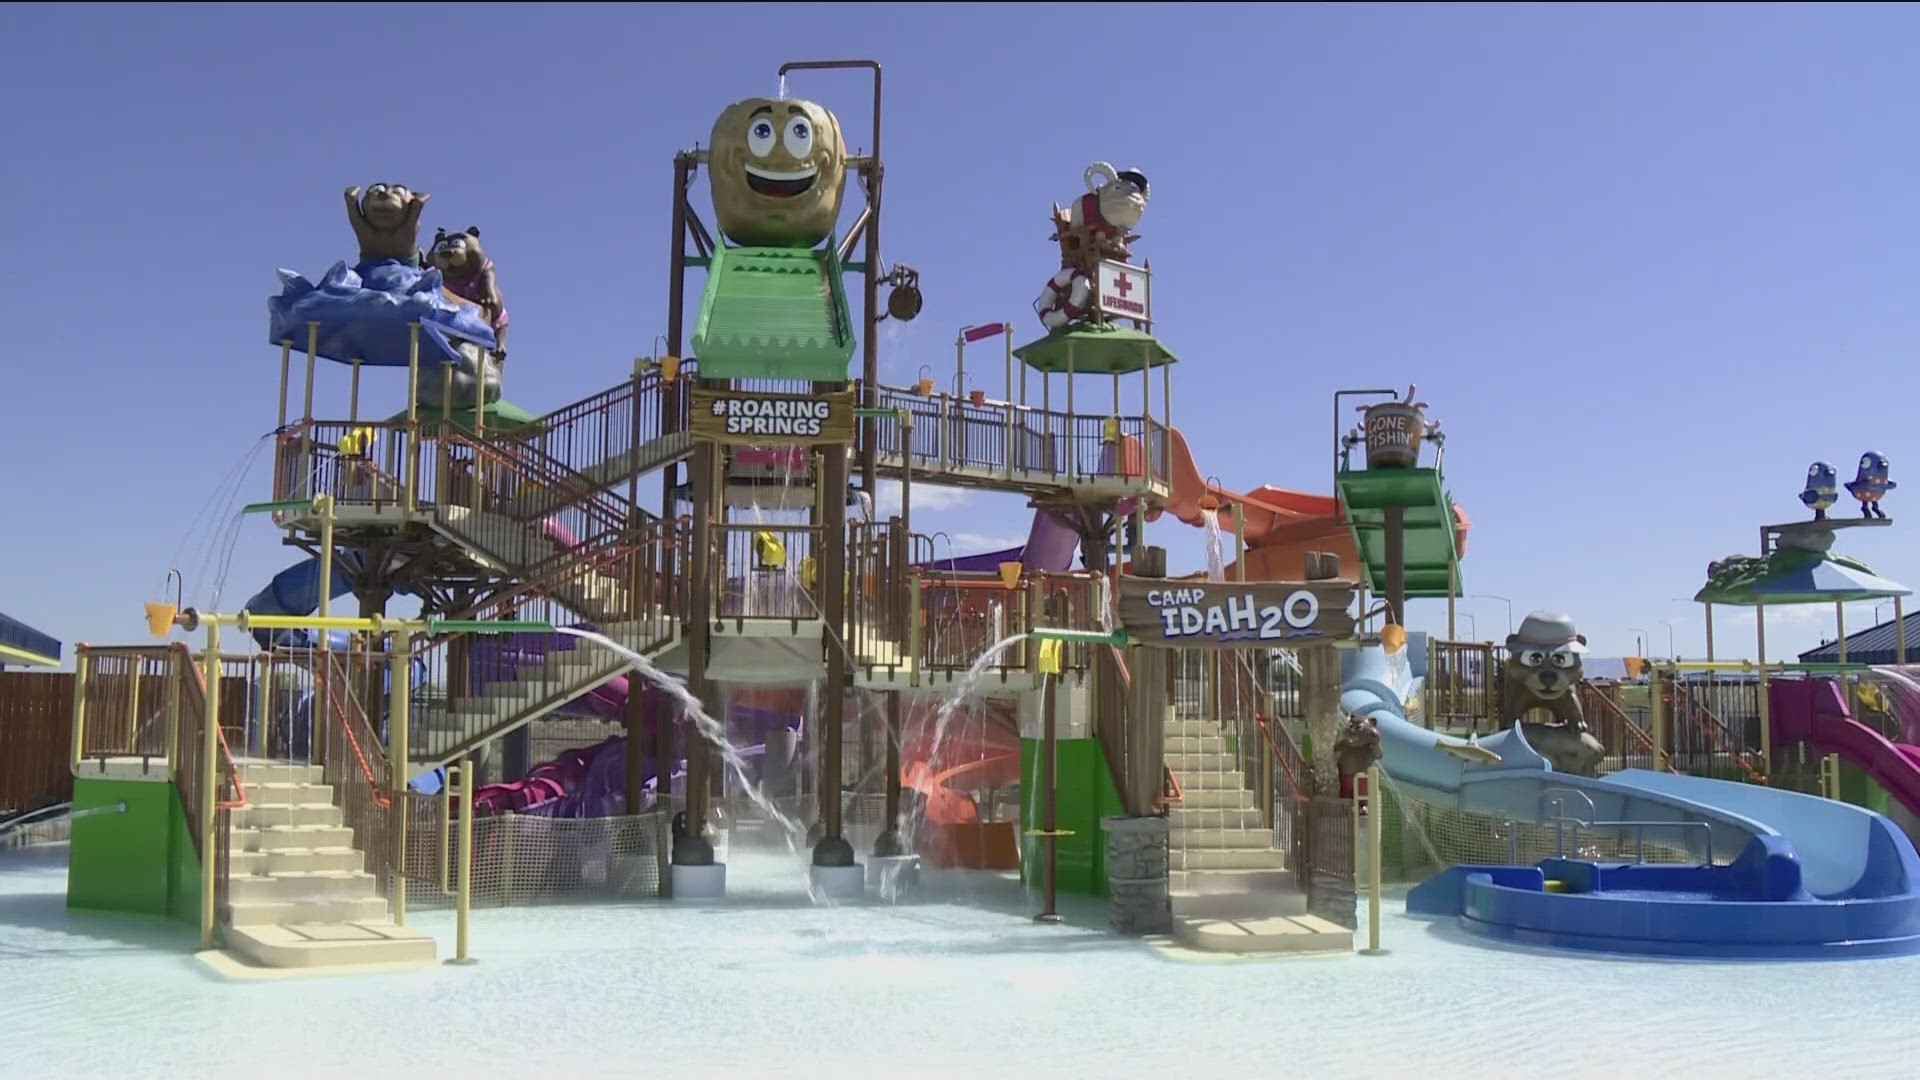 Roaring Springs' existing waterpark opened for the summer on Saturday. Meanwhile, KTVB got an inside look at the new attractions set to open to the public on May 31.